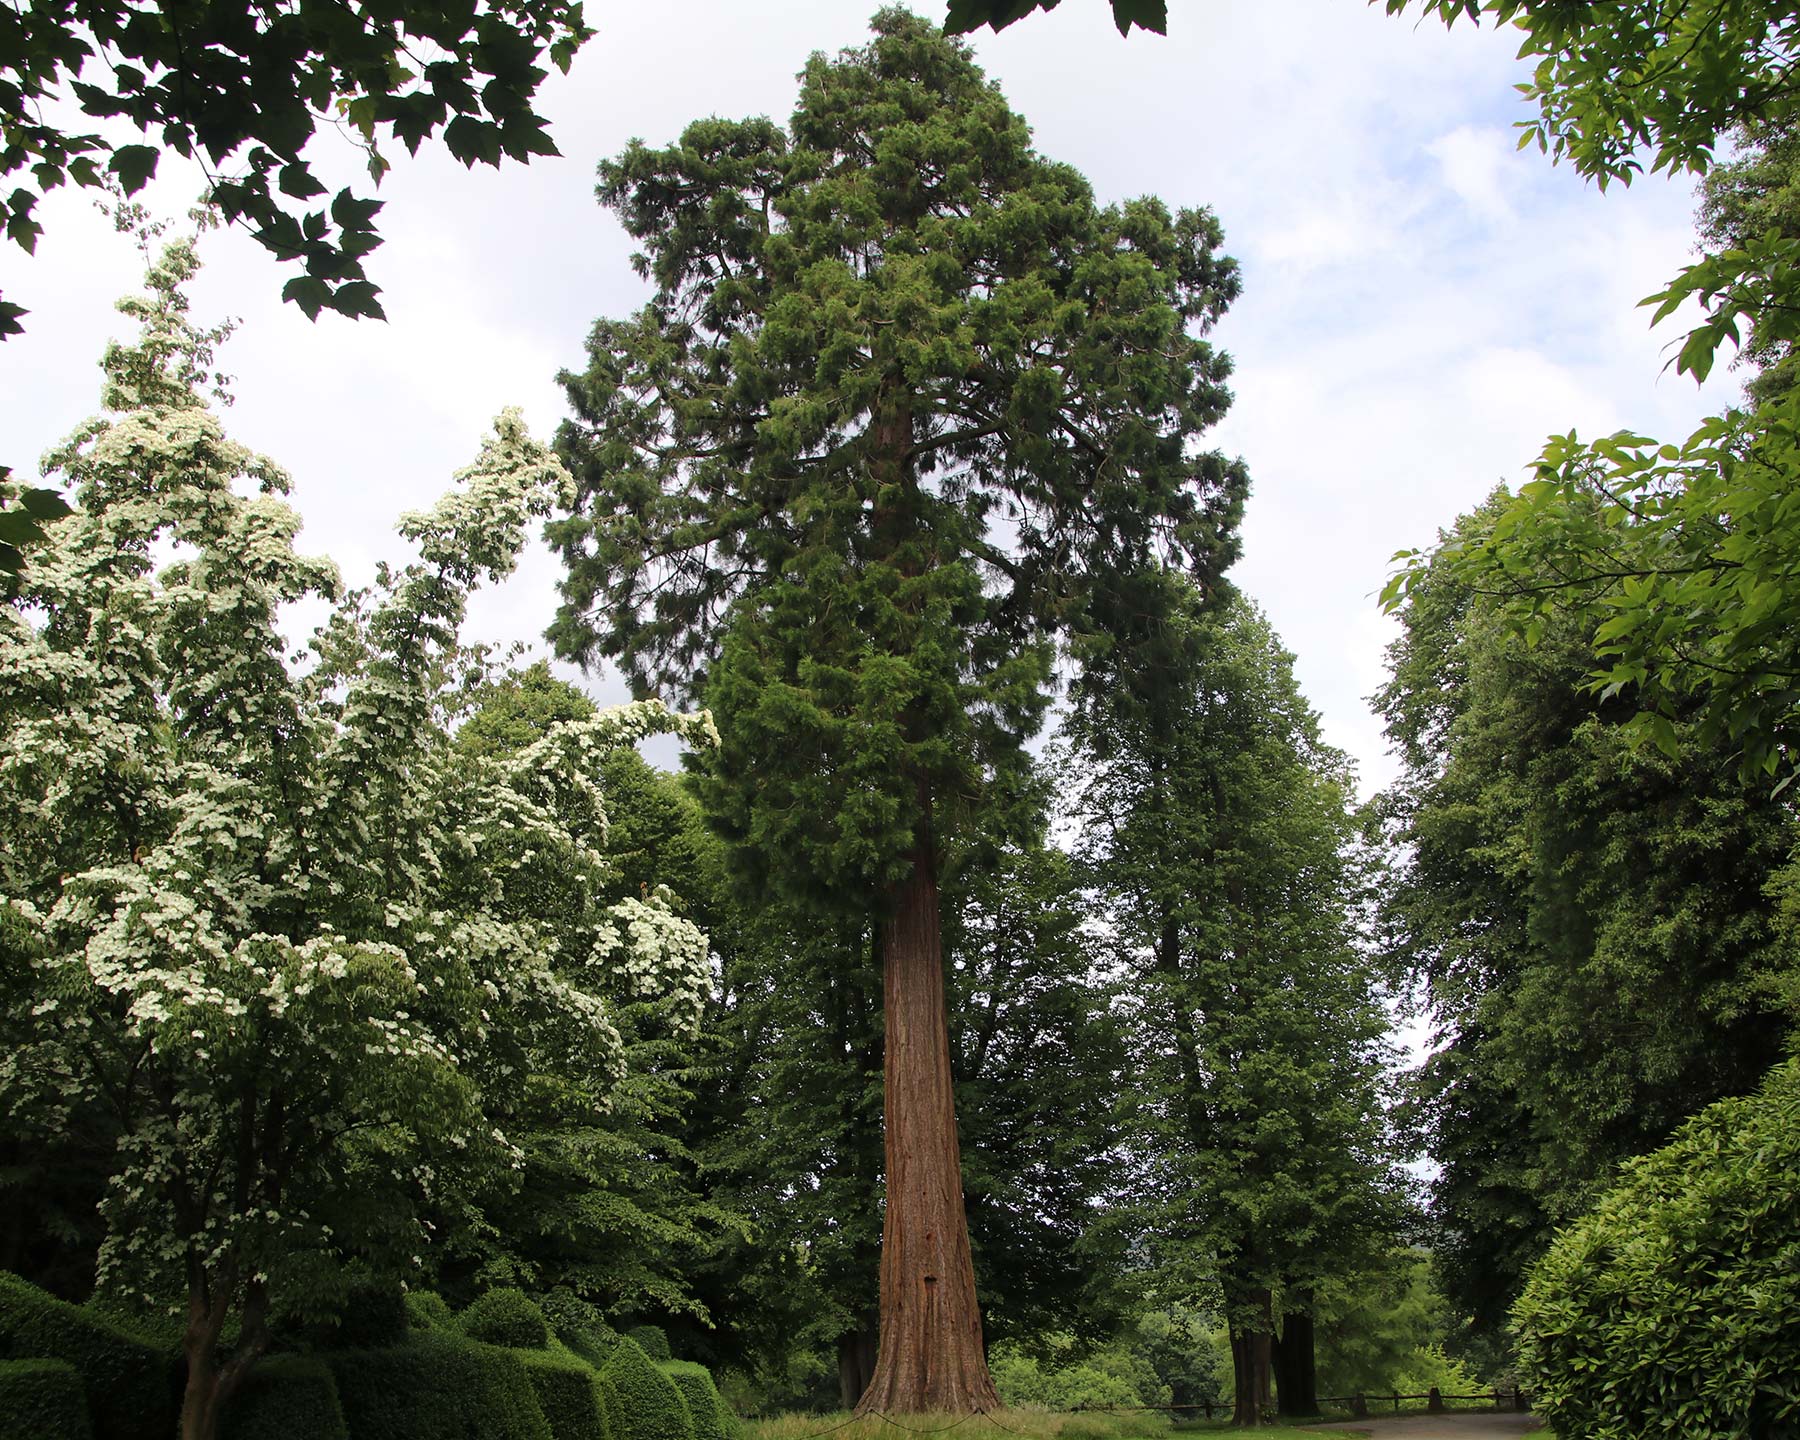 Sequoiadendron giganteum, or Wellingtonia - as seen at Nymans, Sussex, UK